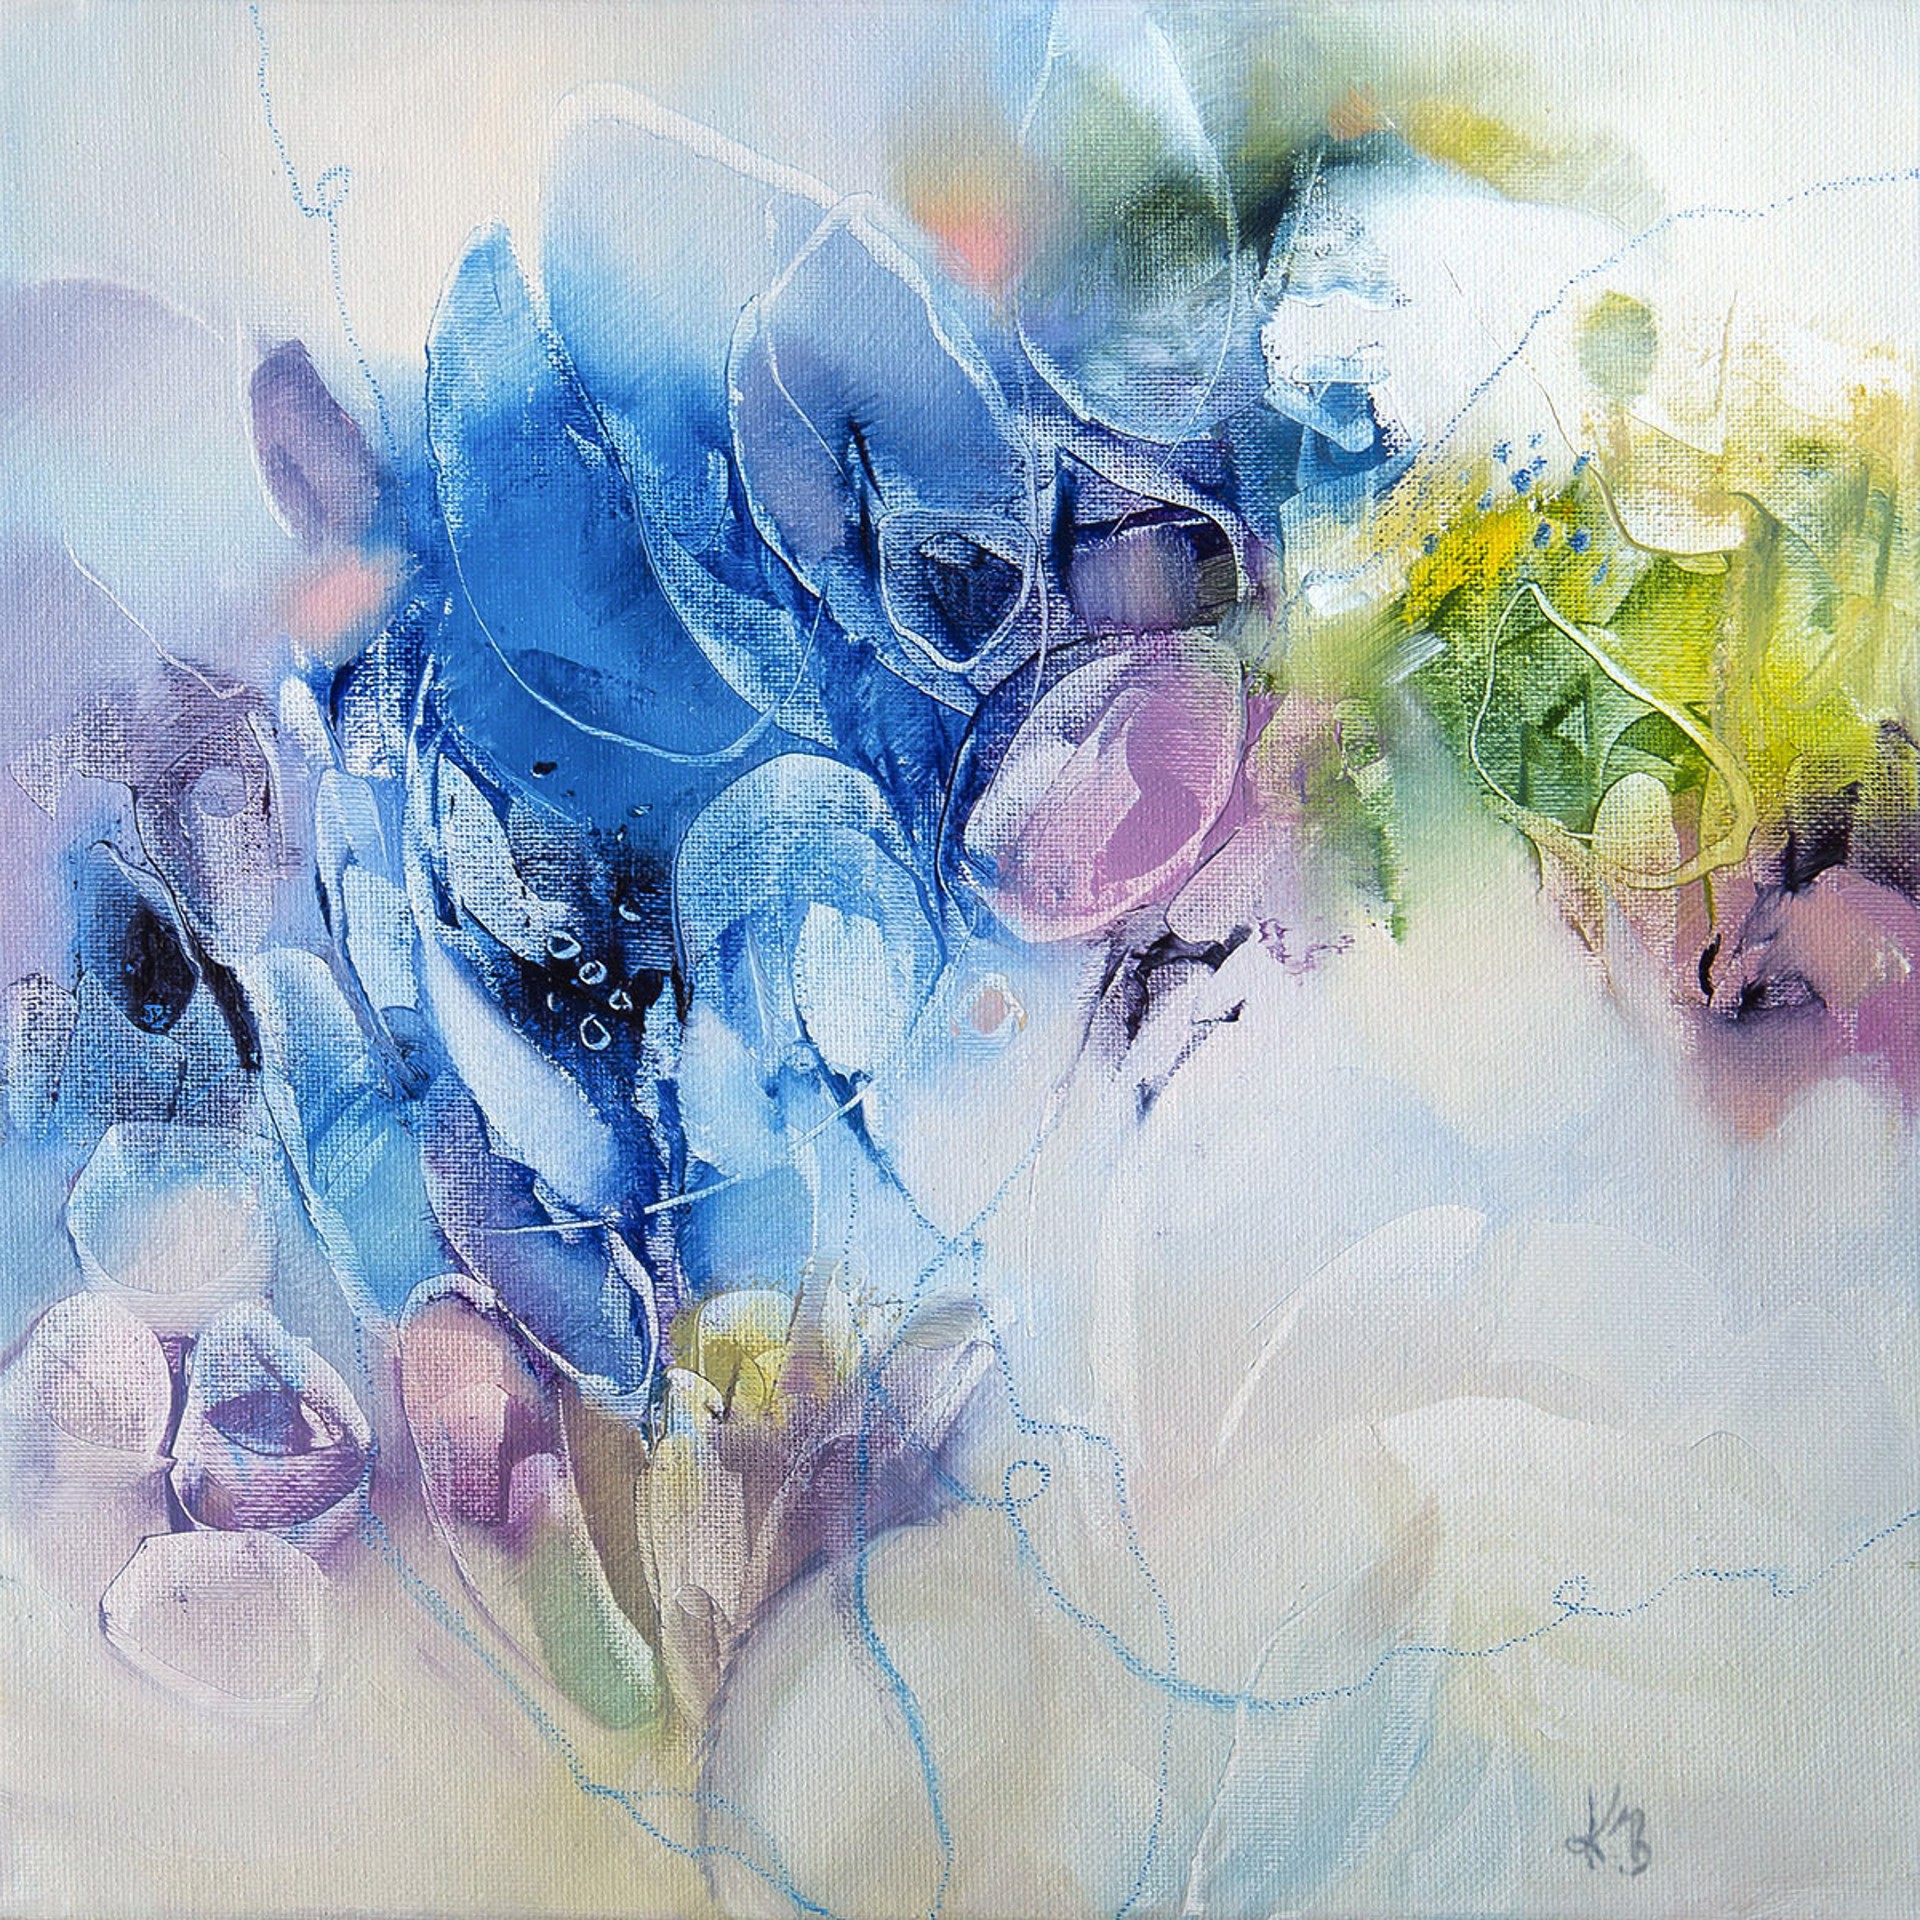 Prelude in Blue by Kasia Bruniany